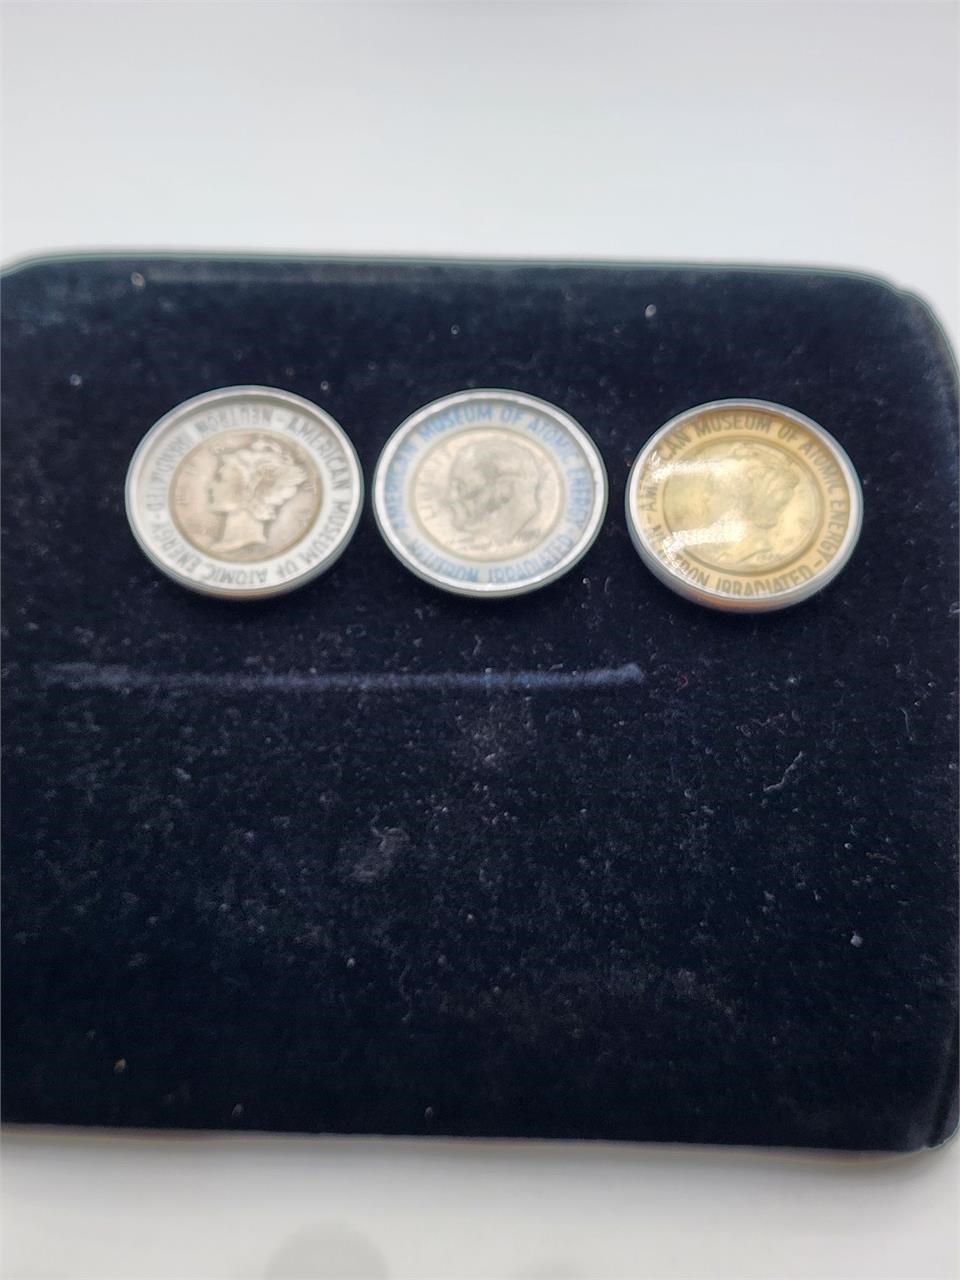 (3) Museum of Atomic Energy Silver Dimes